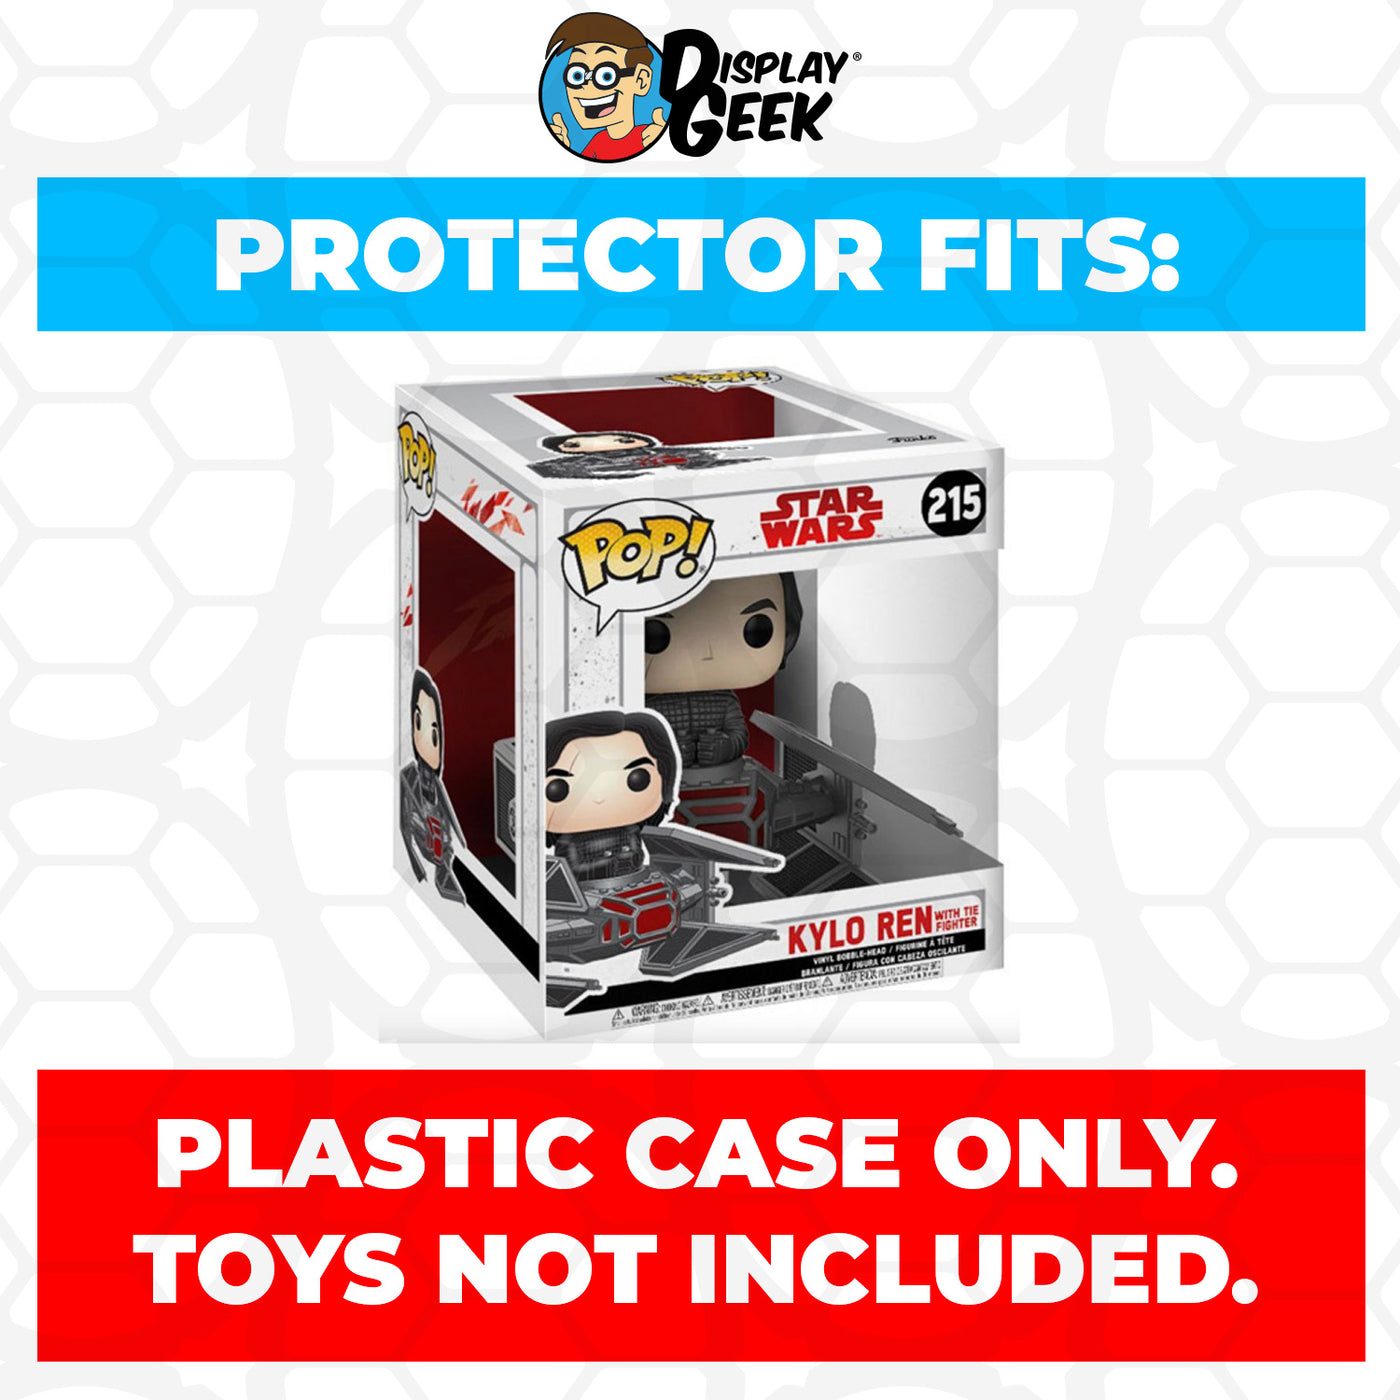 Pop Protector for Kylo Ren with Tie Fighter #215 Funko Pop Rides on The Protector Guide App by Display Geek